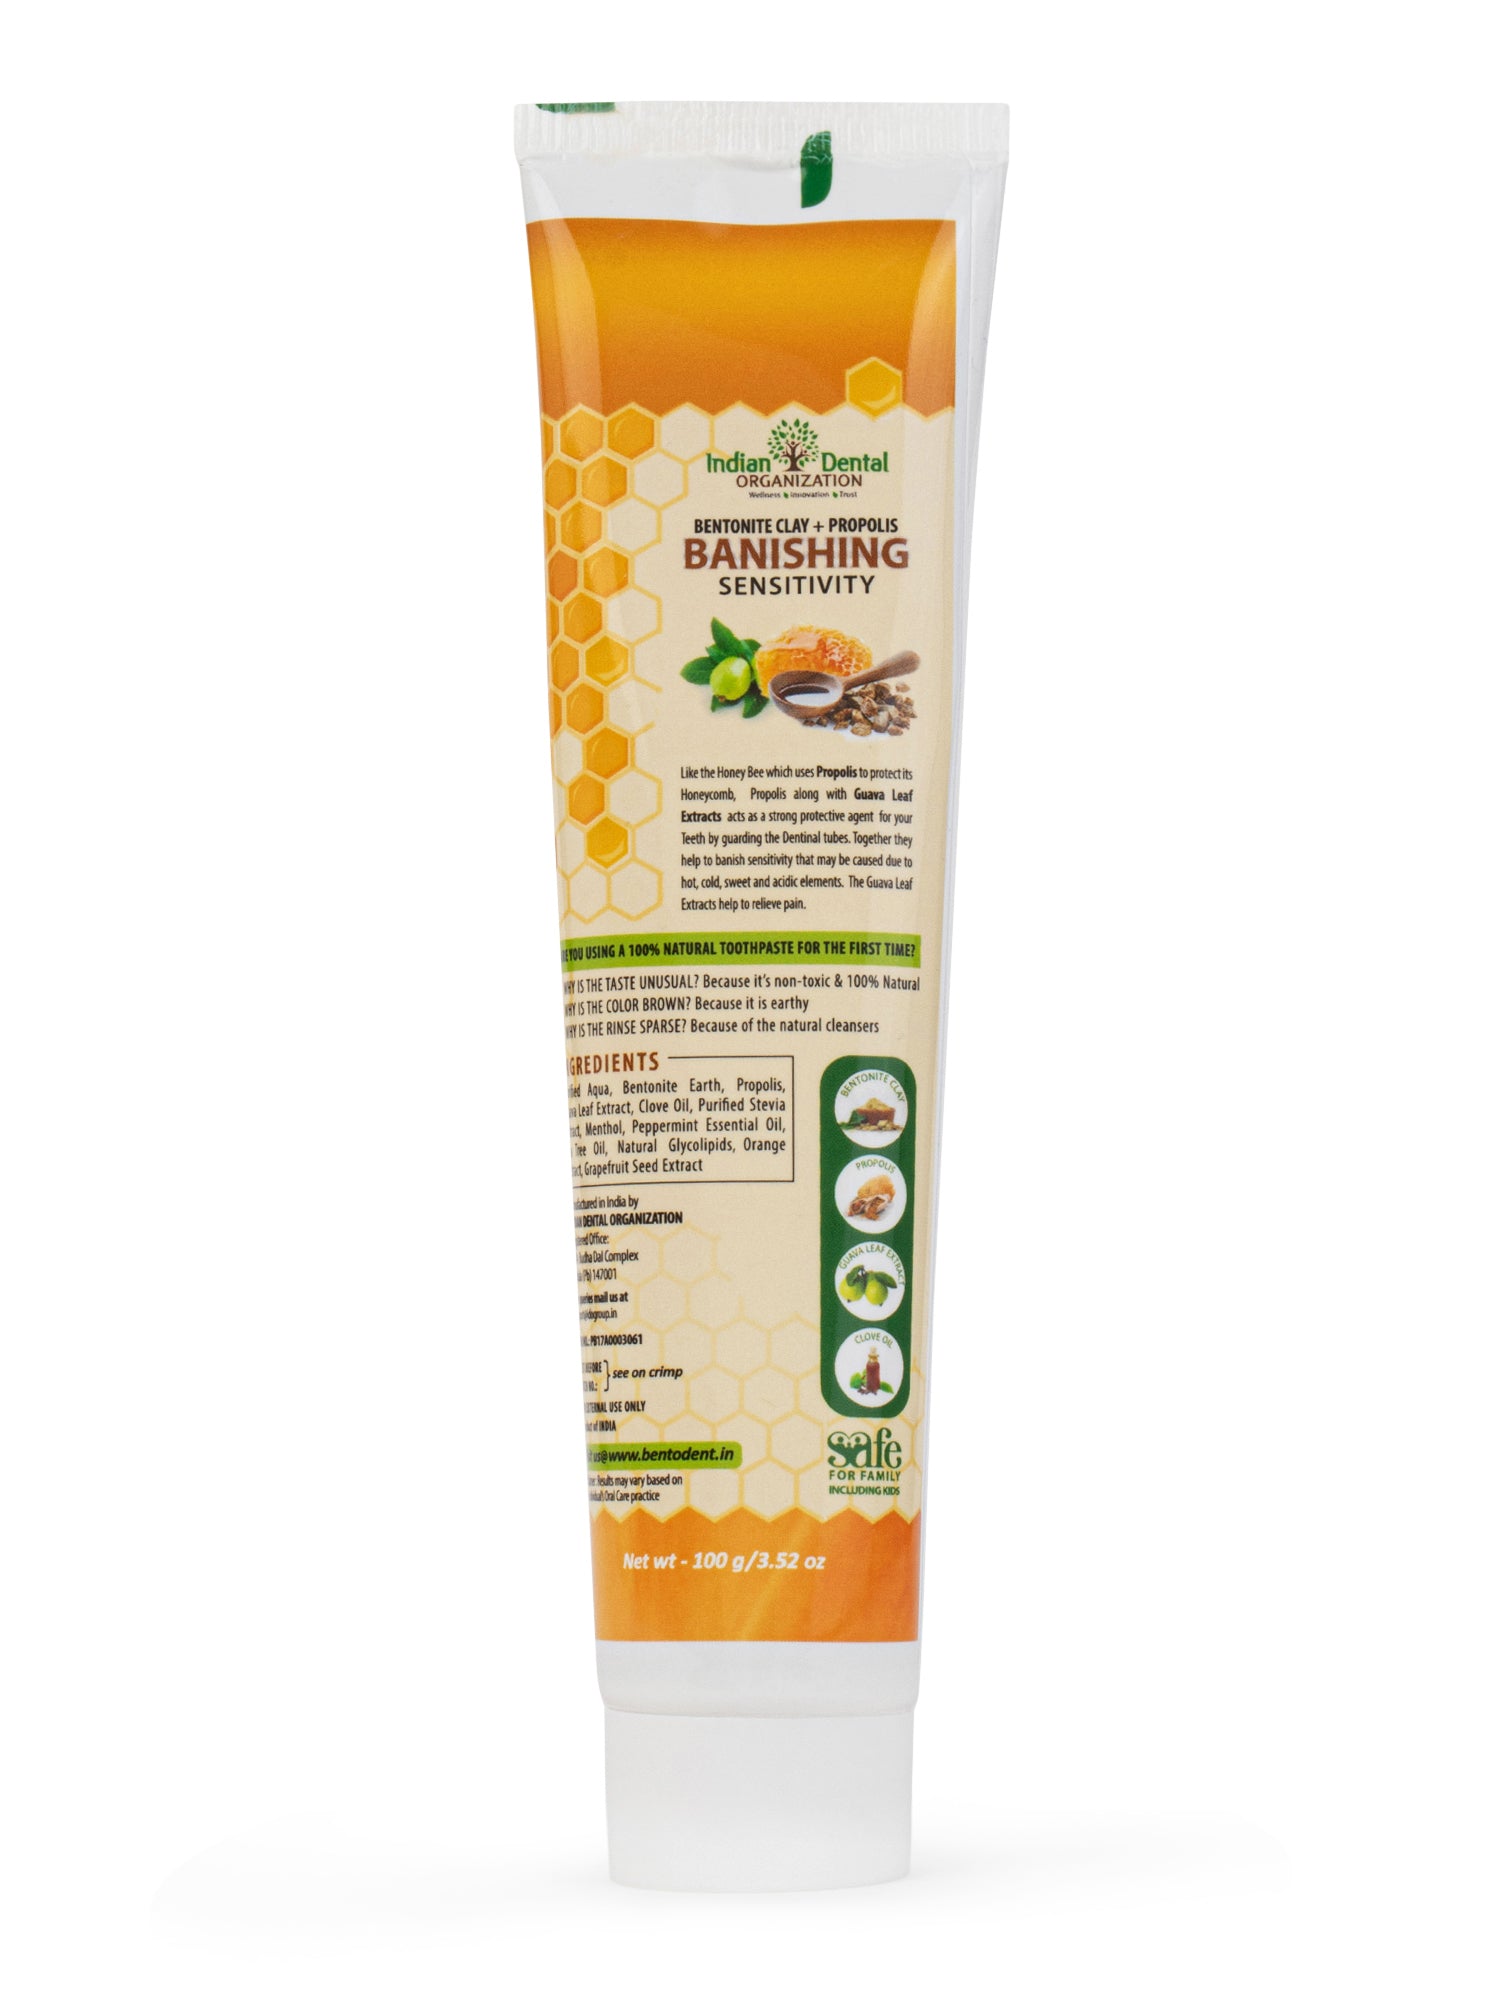 Bentodent Toothpaste - Desensitizer Natural Sensitivity Relief Toothpaste with Clove And Mint - 100 Gm - Indian Dental Organization